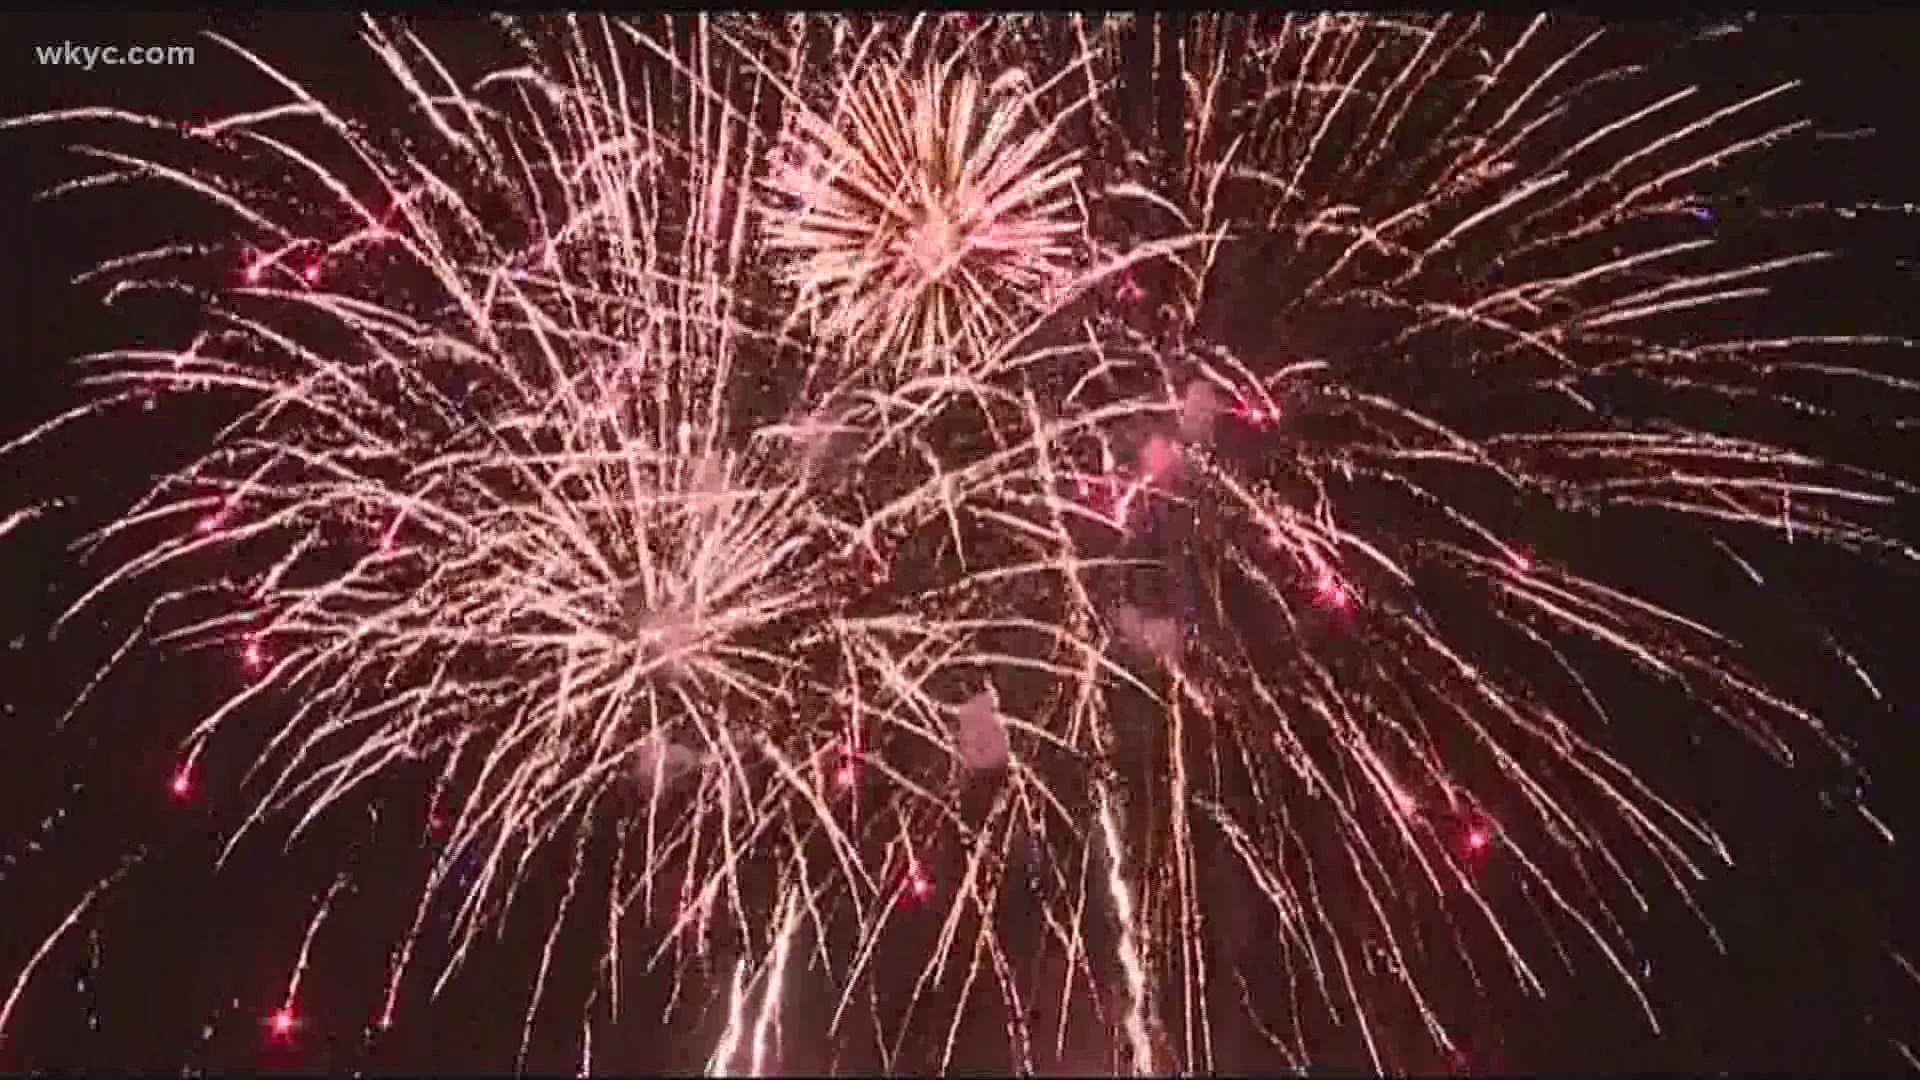 Officials have organized a synchronized program of fireworks that will be launched from multiple locations, allowing residents to watch from home.